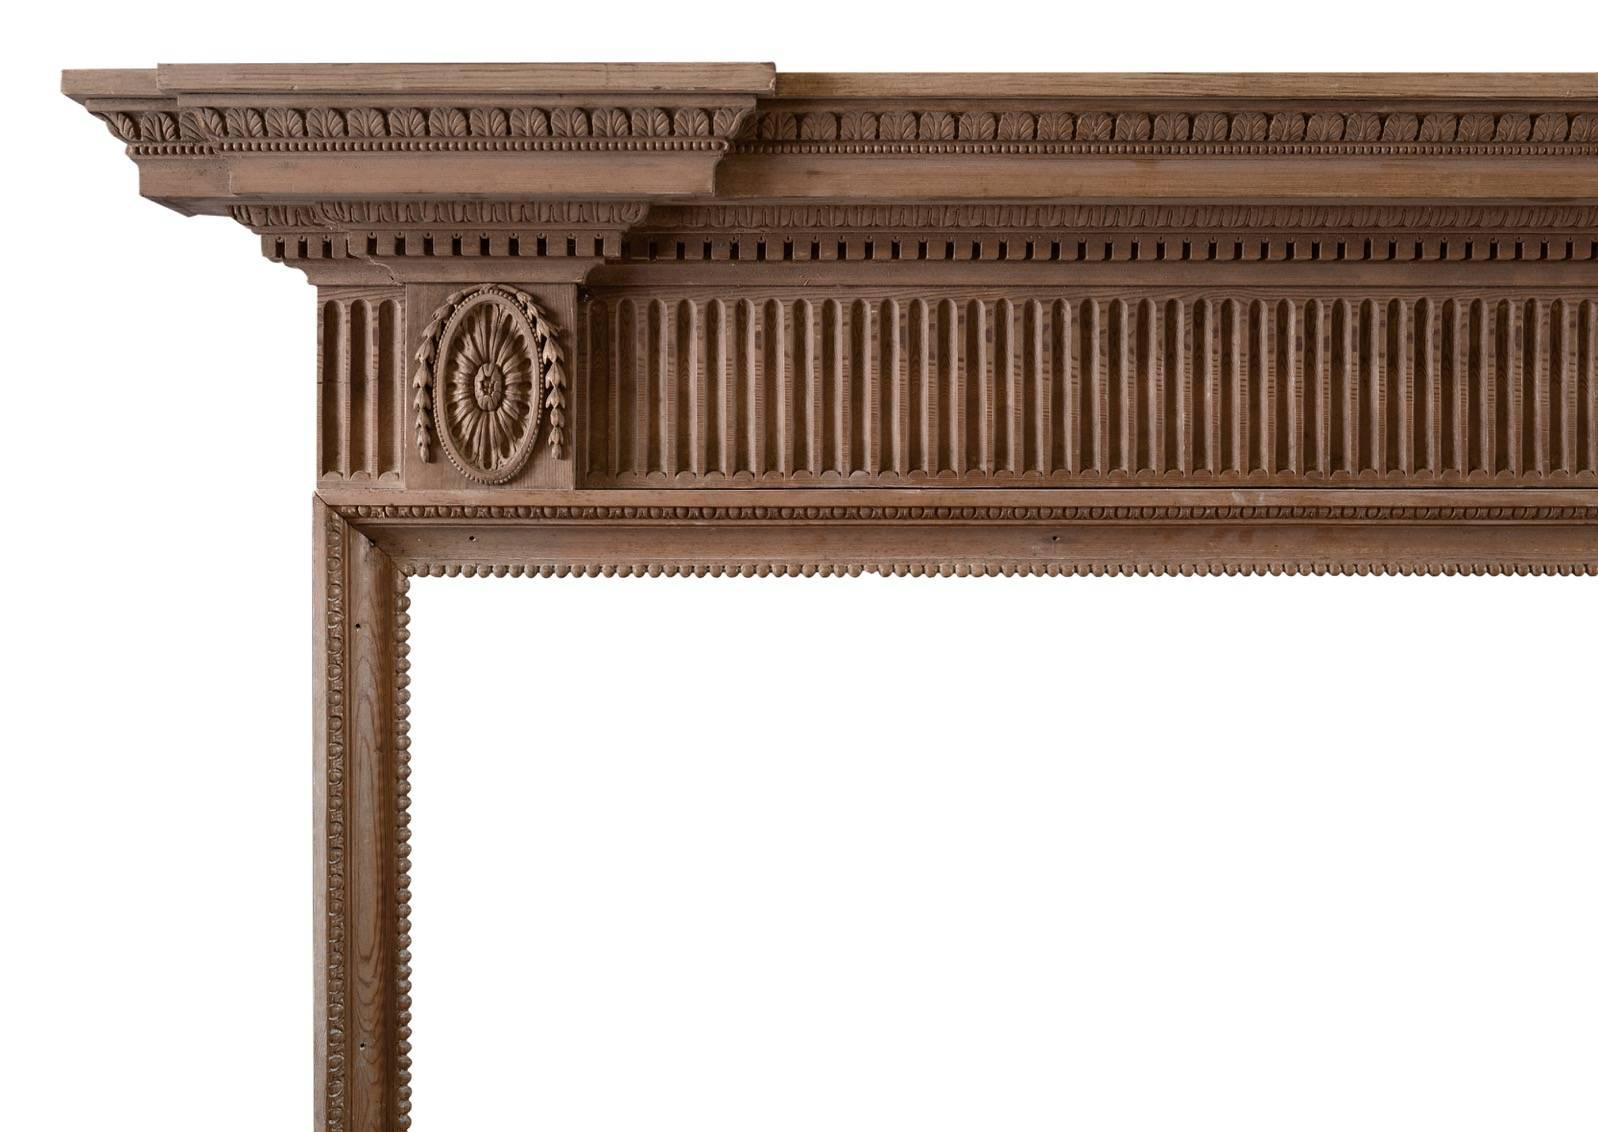 A delicate Georgian style fireplace. The fluted frieze with oval paterae and husks to end blocks, the shelf with stiff waterleaf mouldings, beading and dentils. Photo’d prior to restoration – a minor repair required to inside of leg, included in